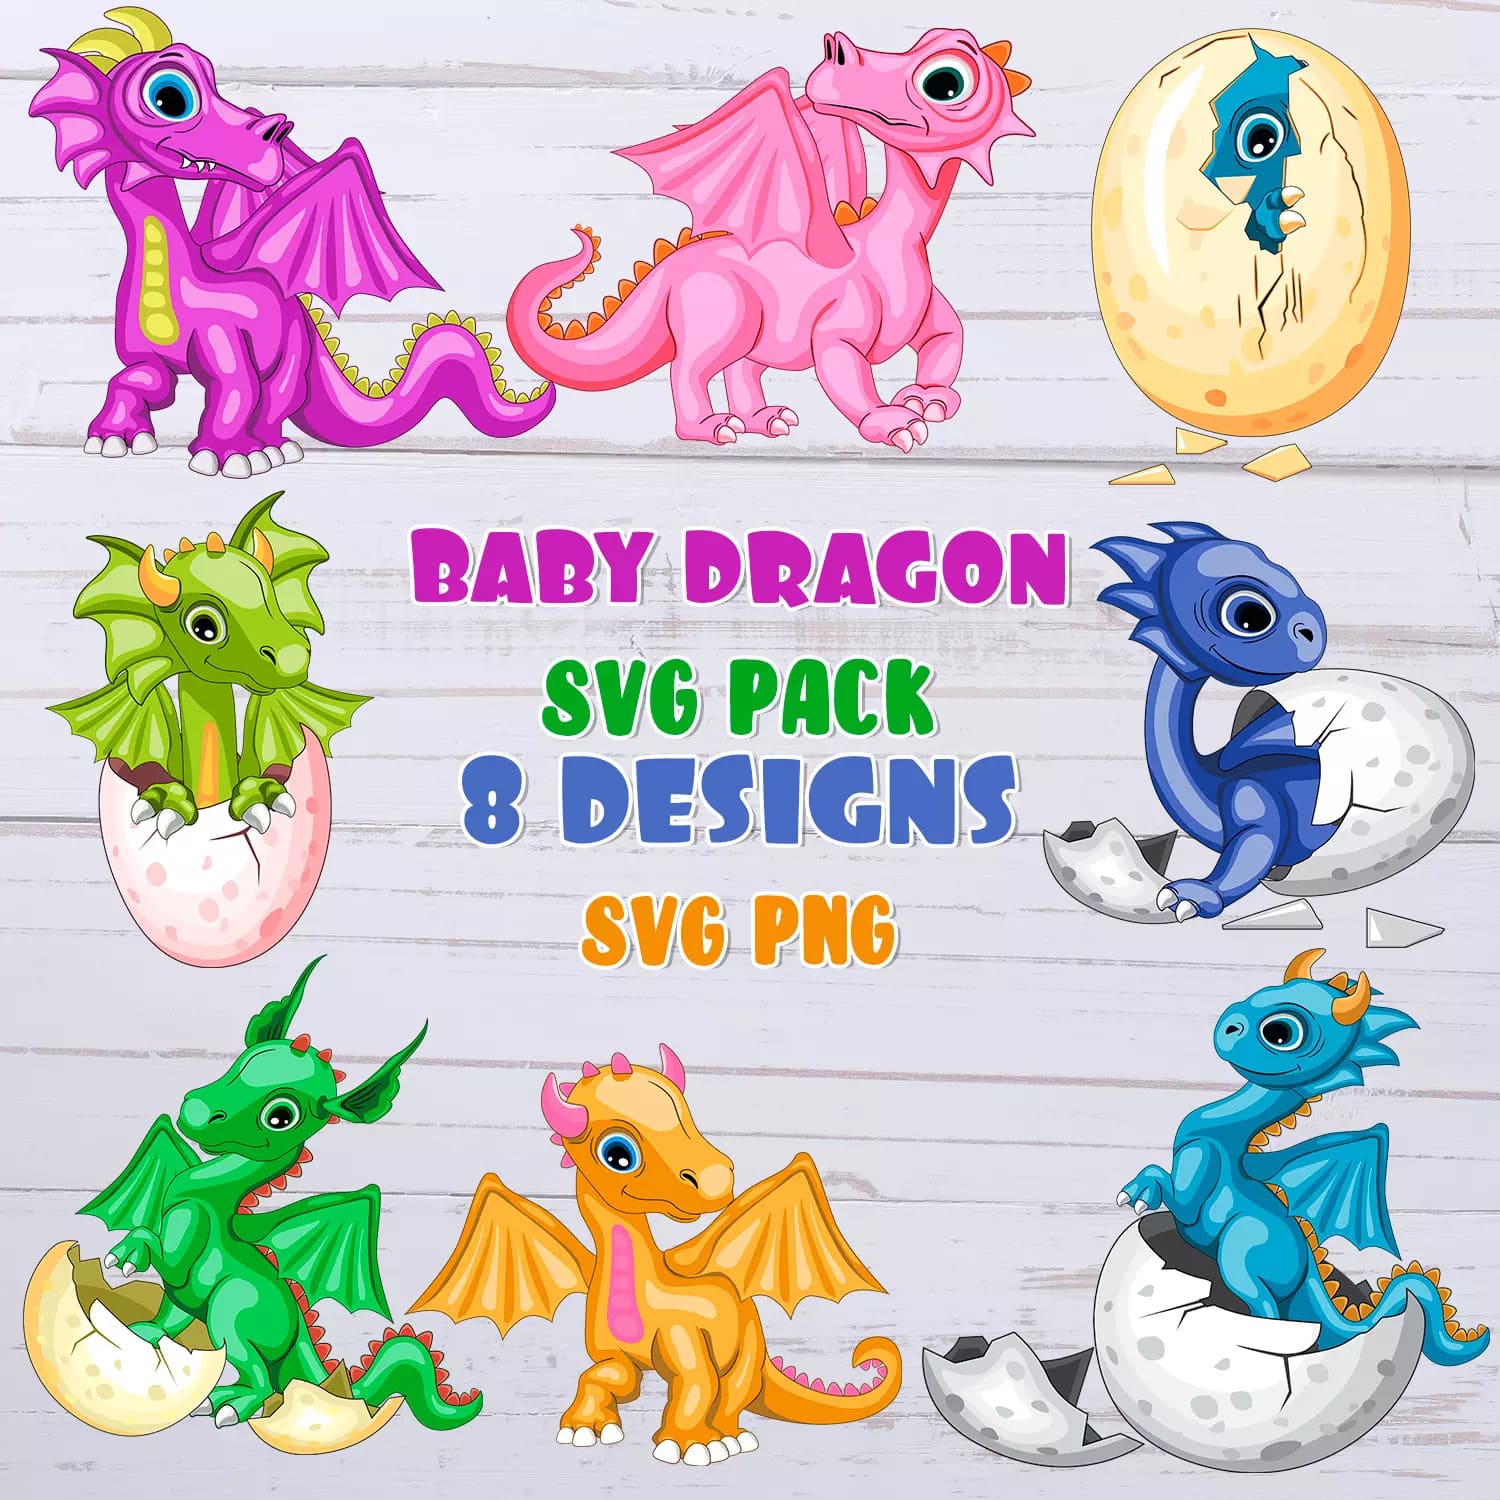 Baby dragon svg pack and designs.